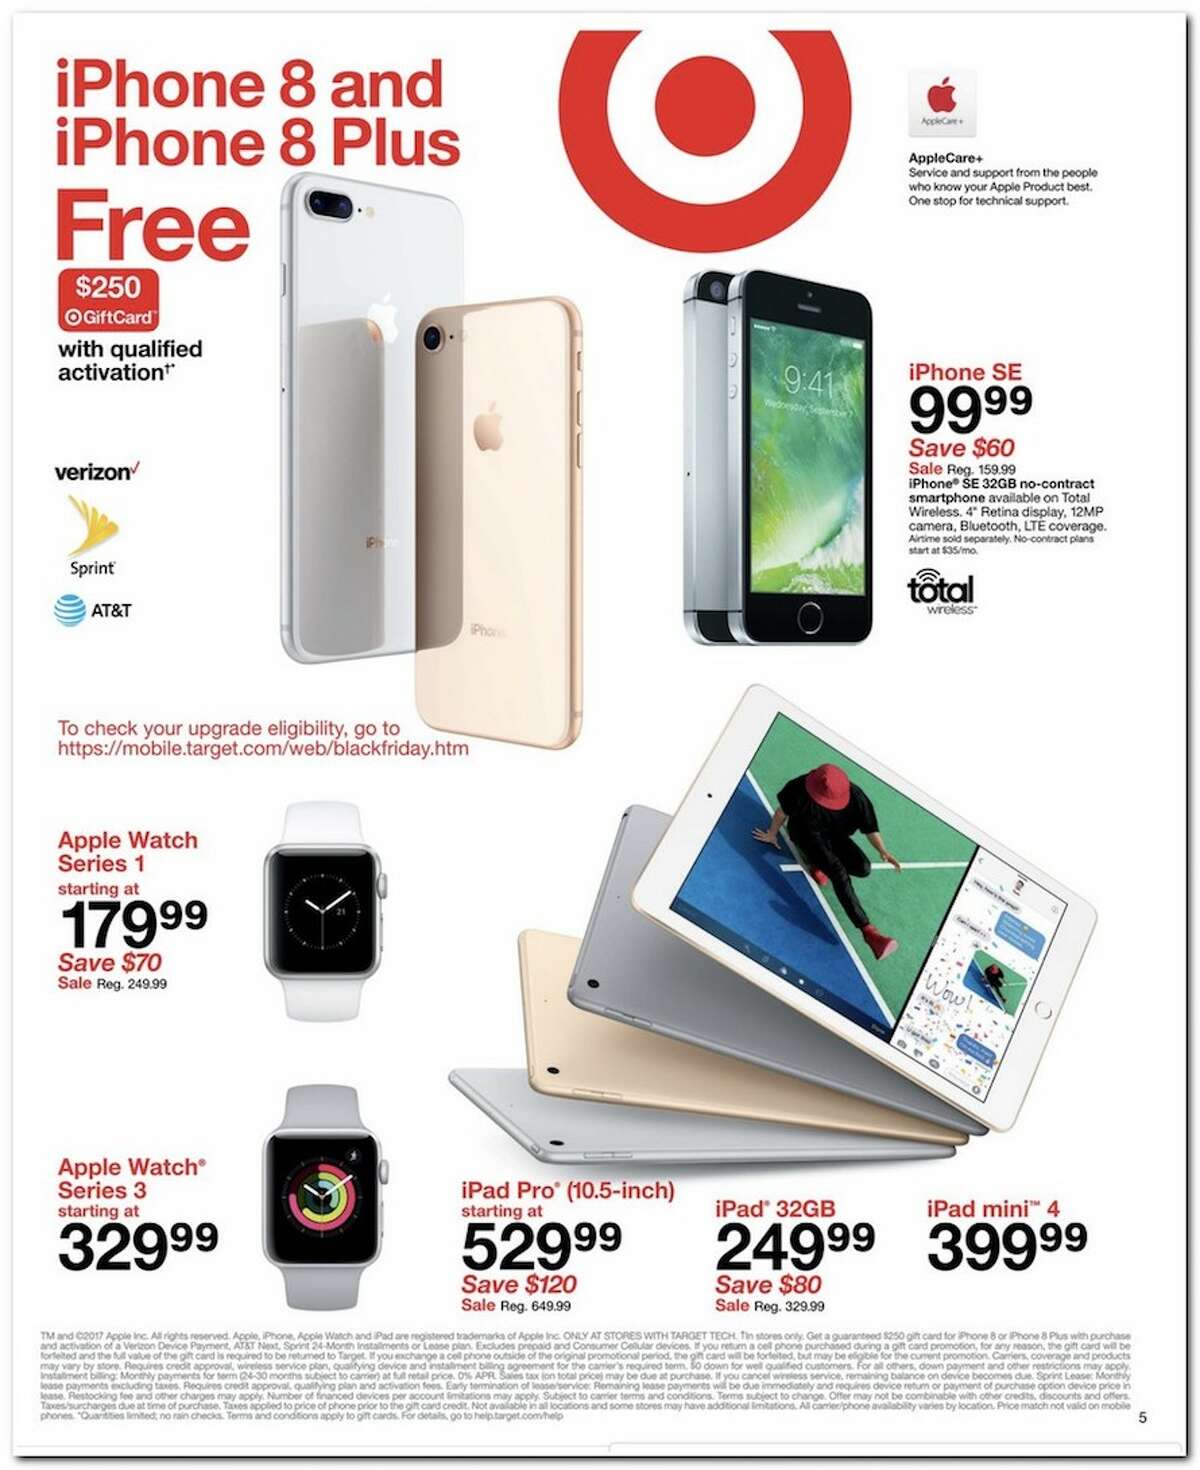 Target has released its 2017 Black Friday Doorbuster ad. Prices and promotion begin on Thursday, Nov. 23 at 6 p.m. and are subject to change and availability, based on the retailer's determination.